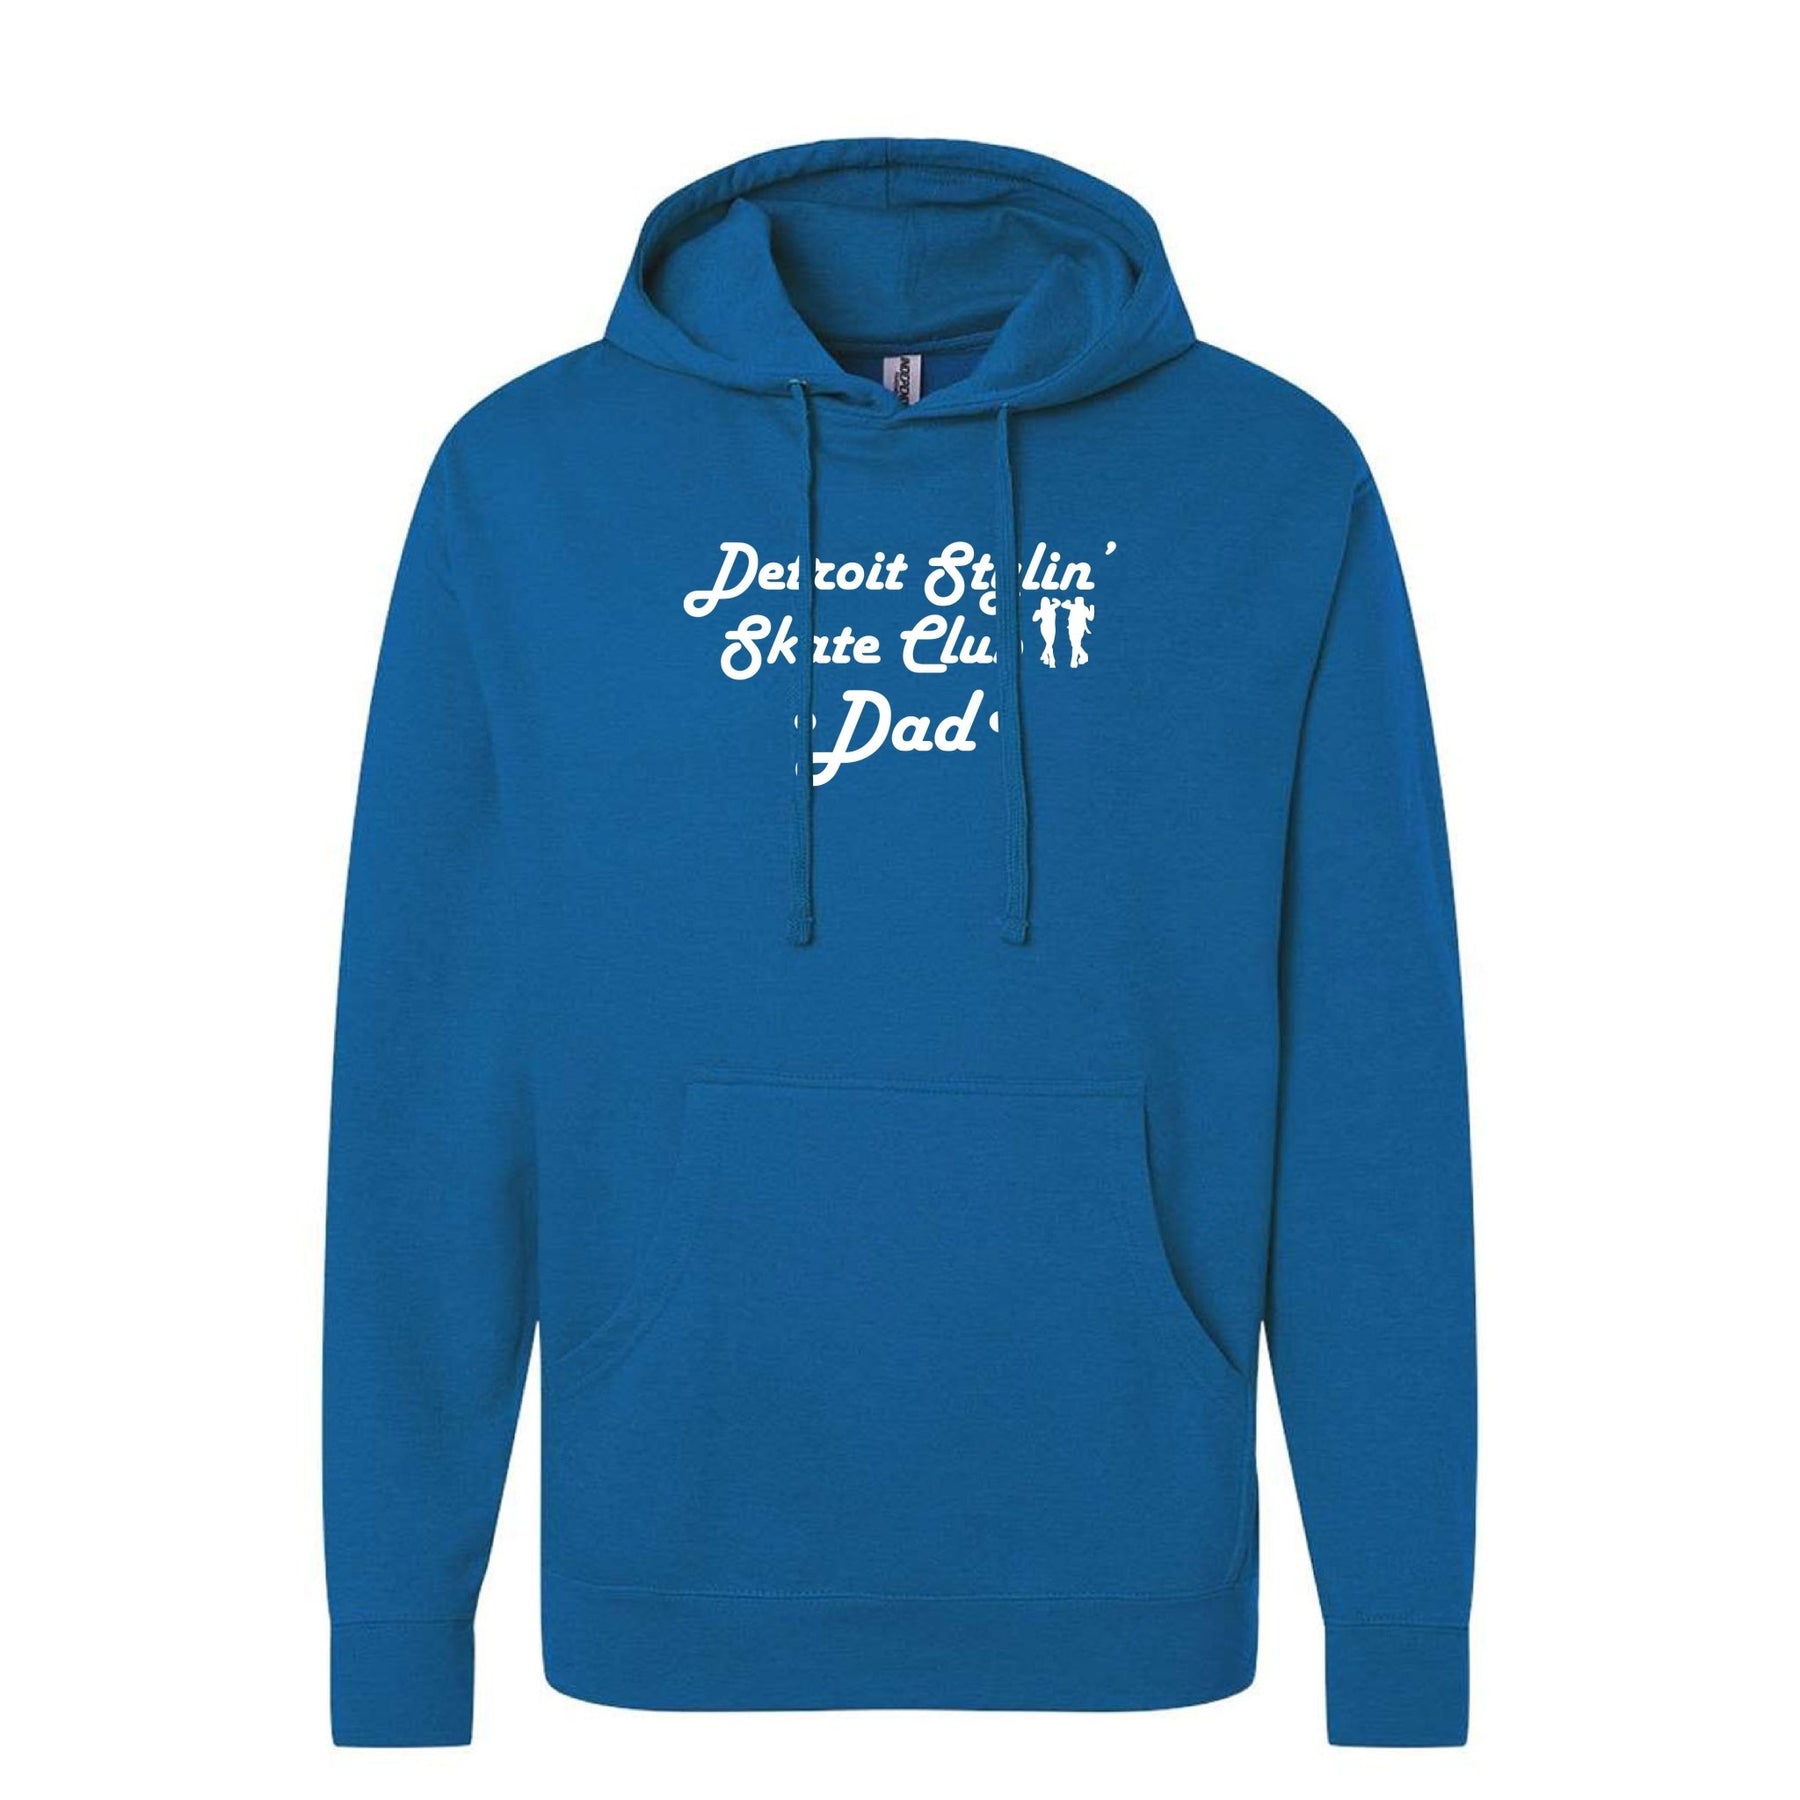 Detroit Stylin Mom and Dad Independent Trading Co. Midweight Hooded Sweatshirt Printed - Mato & Hash